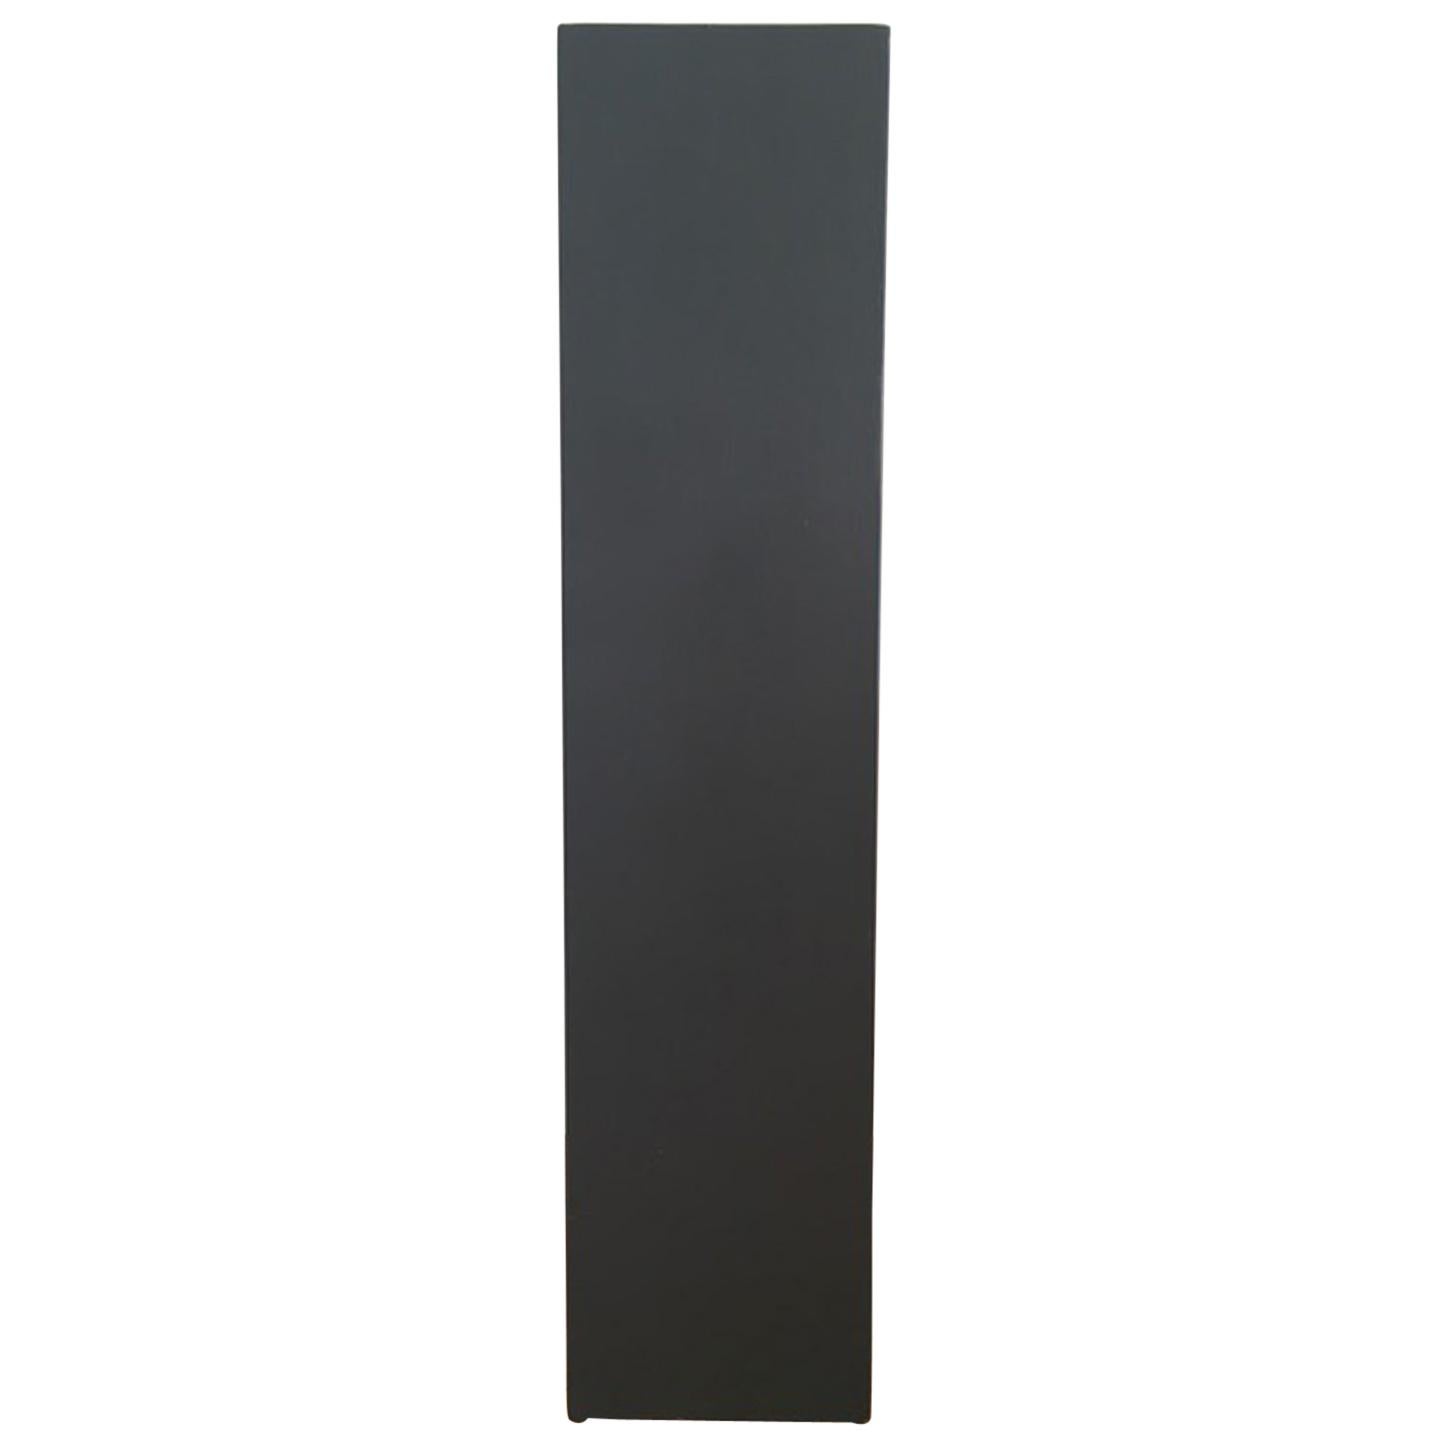 21st Century Italy Wooden Grey Lacquered Column